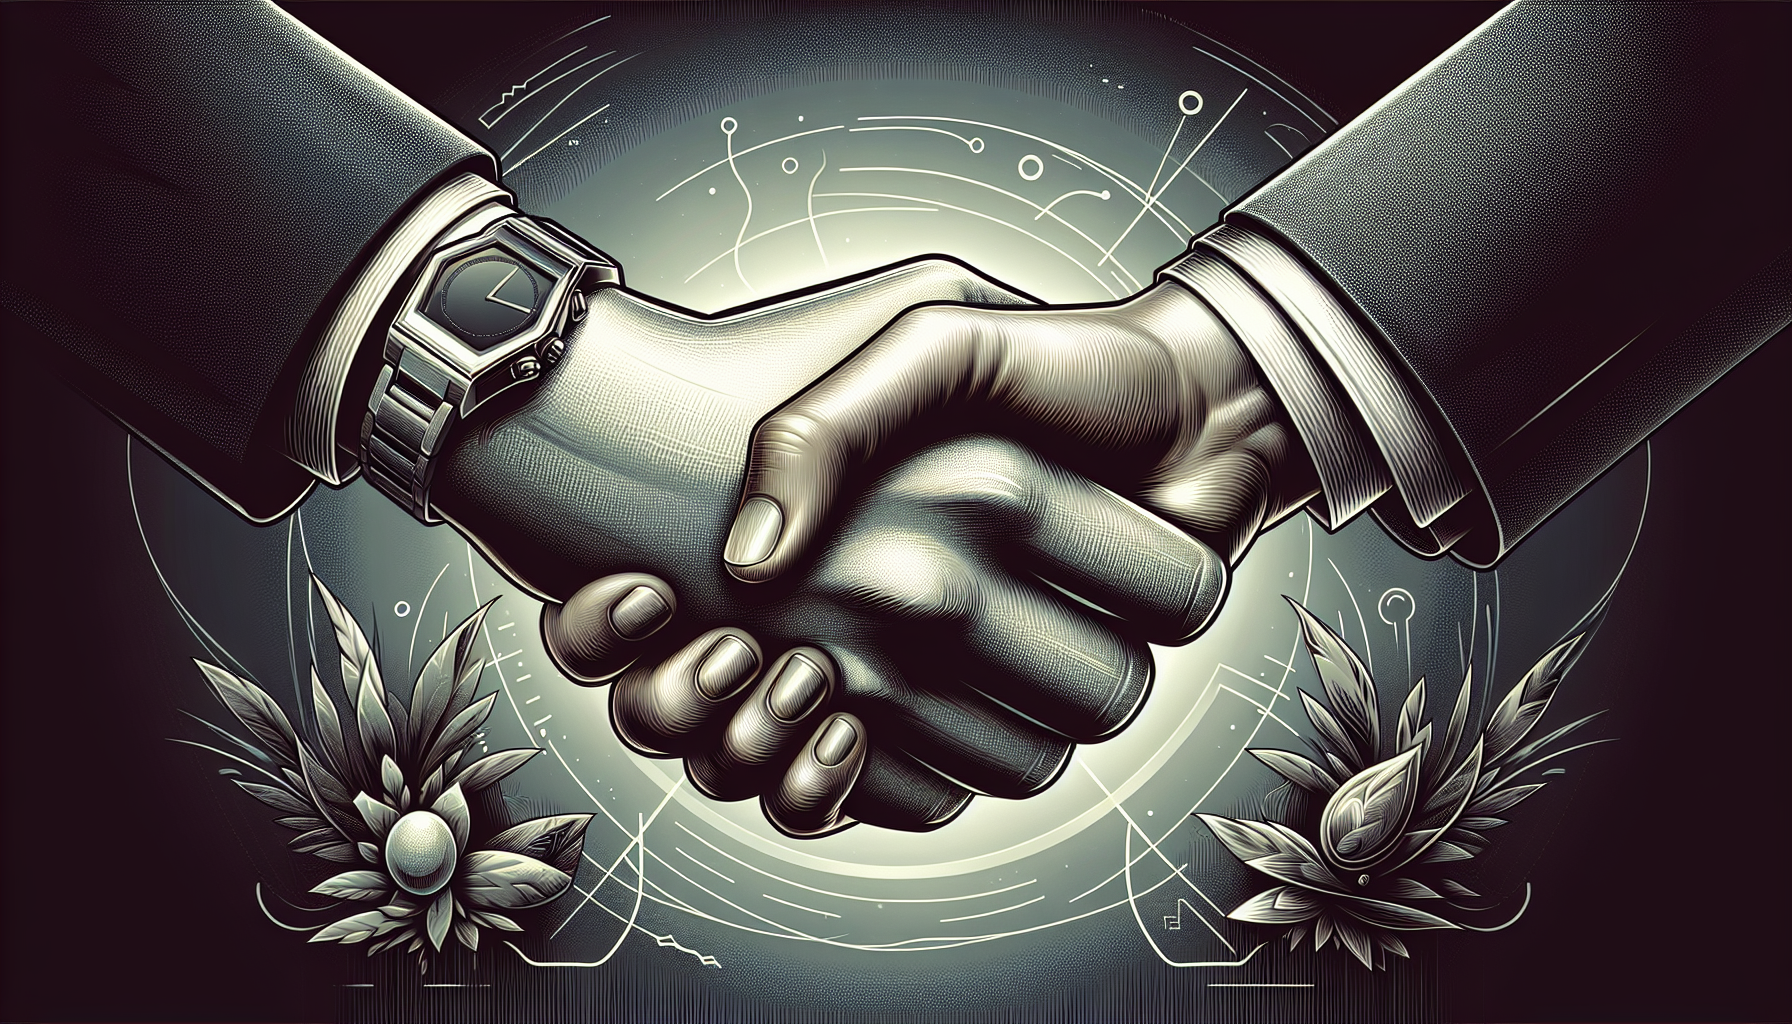 Illustration of a handshake representing a legally binding contract